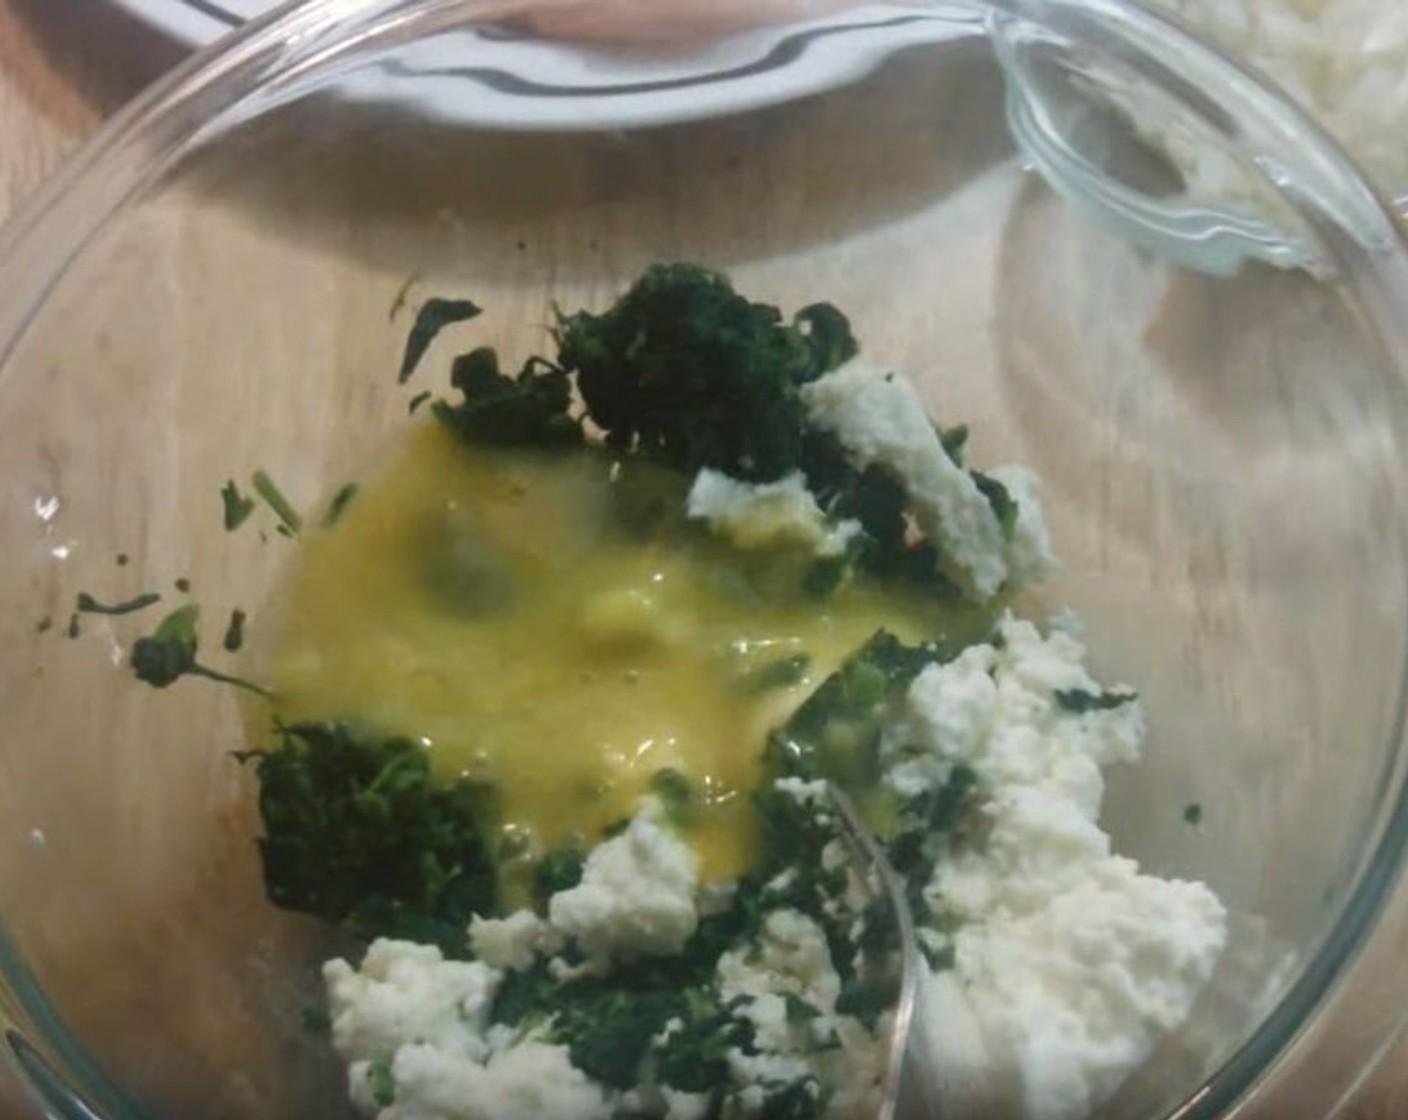 step 2 Into a mixing bowl, add Frozen Spinach (1 cup), Ricotta Cheese (1/2 cup), and Egg (1). Mix well, mashing the cheese to make the mixture as smooth as possible.